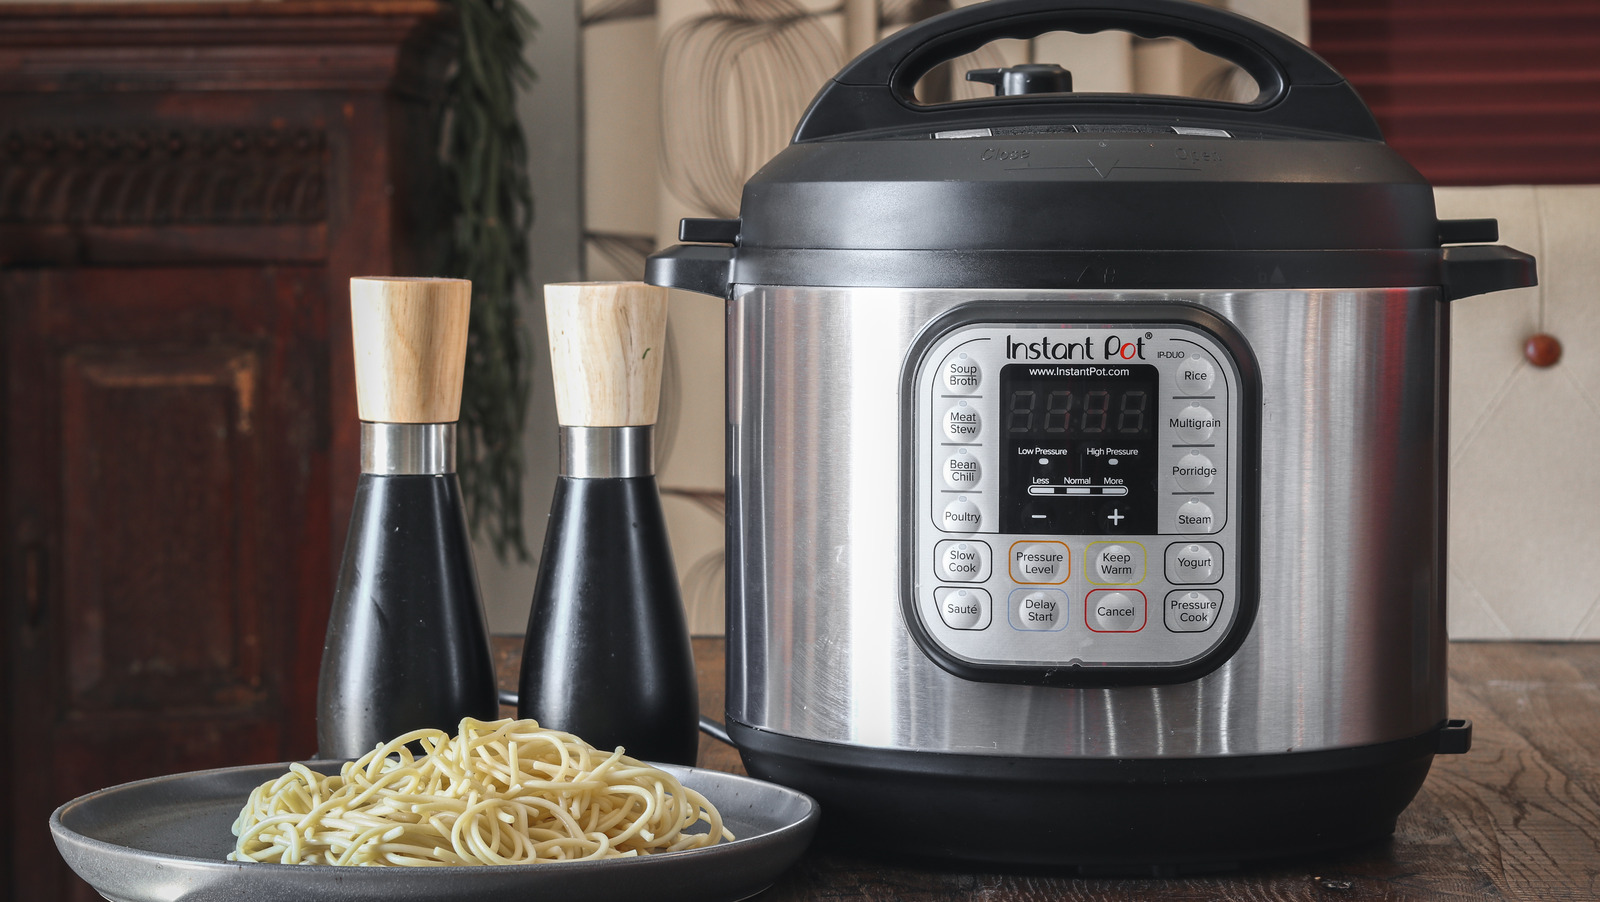 https://www.tastingtable.com/img/gallery/the-reason-you-need-so-much-liquid-for-pasta-in-your-instant-pot/l-intro-1659980943.jpg